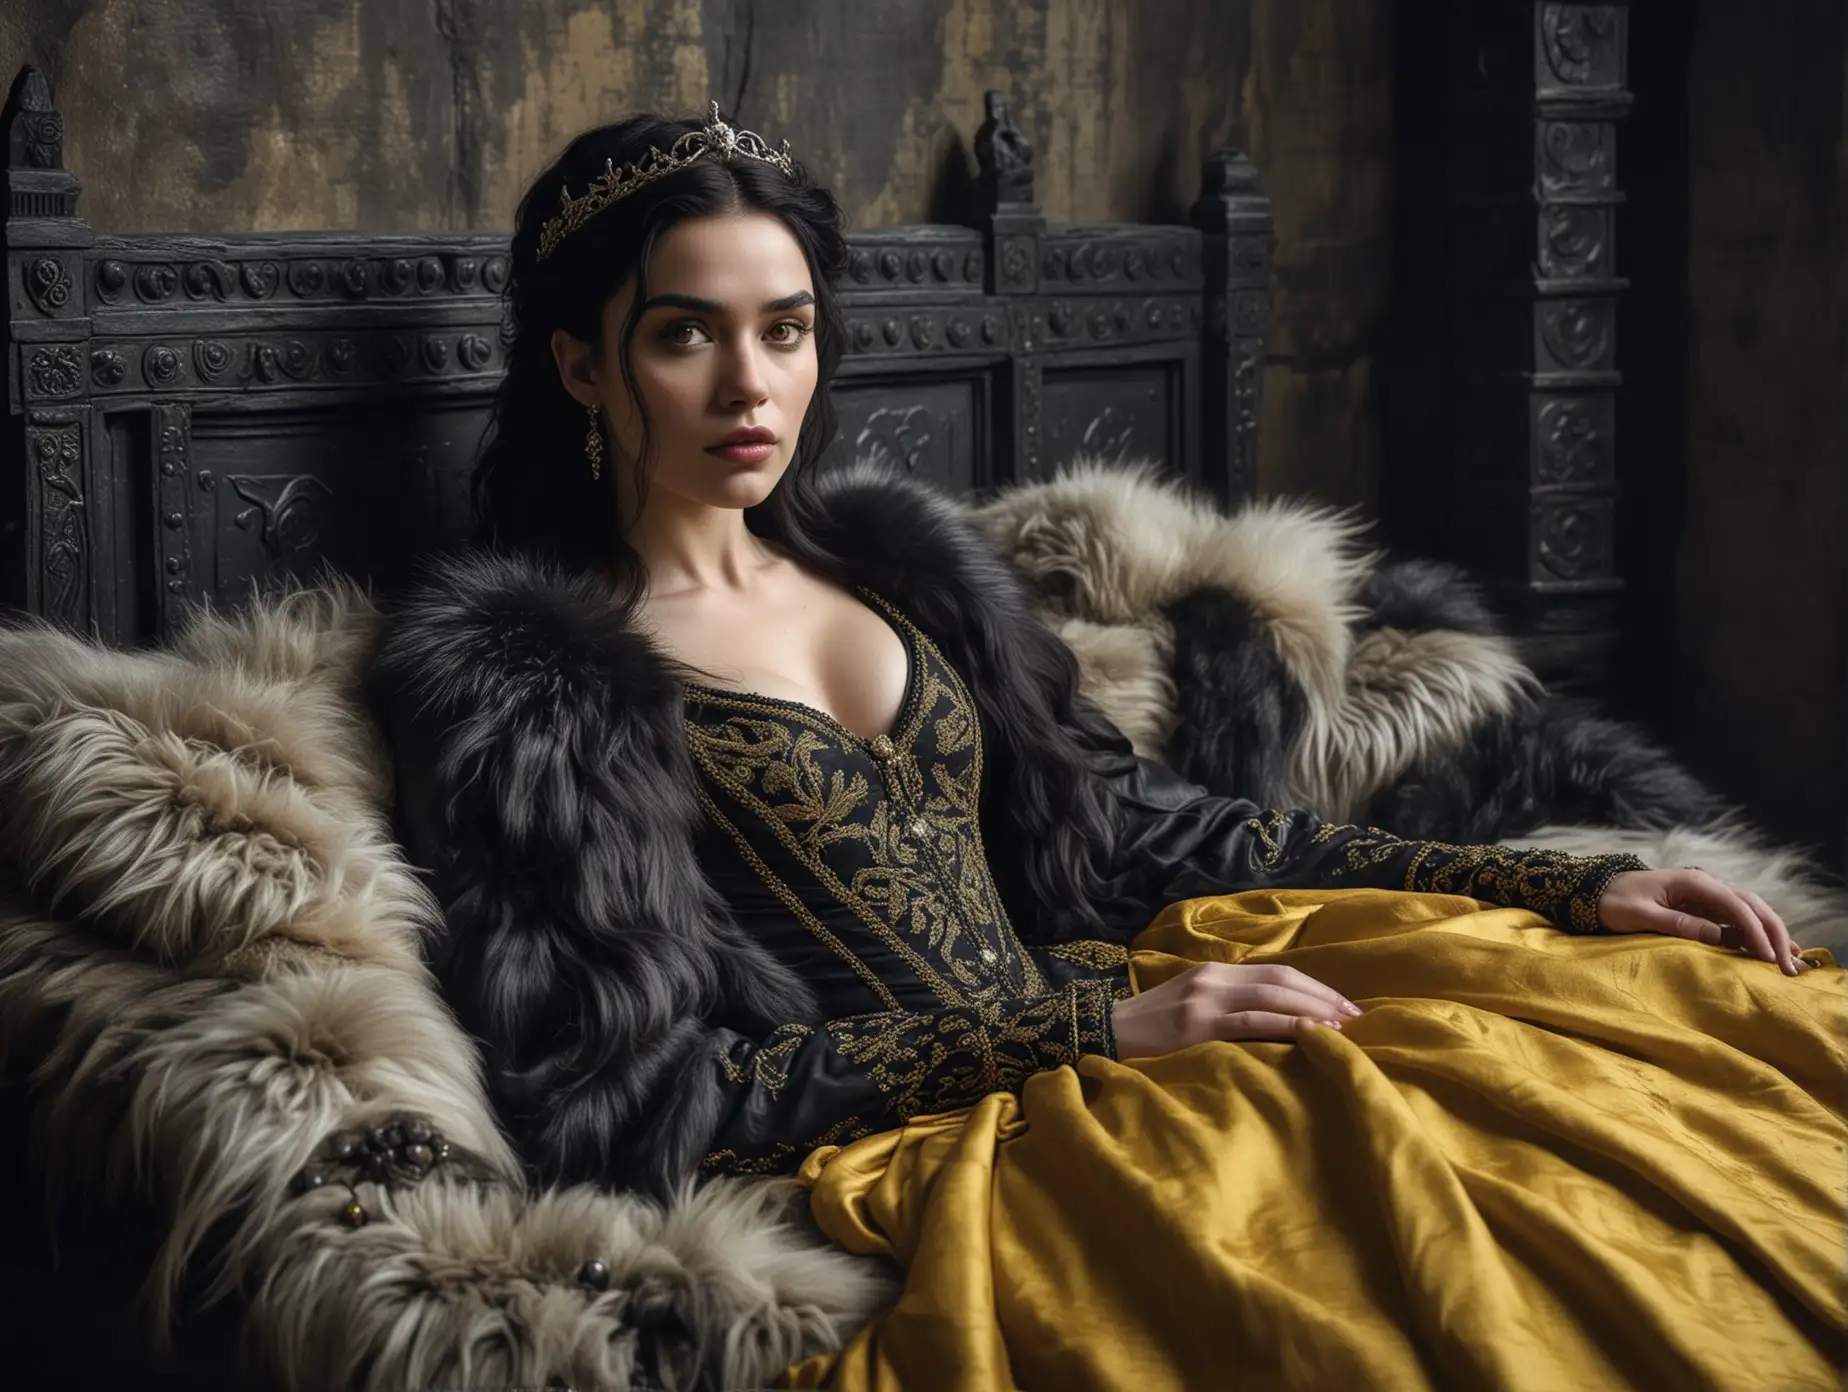 Game of thrones universe, a young woman, pale with thick black hair, with white skin and dark eyes, high cheekbones and plump lips, wearing black and yellow medieval gown with gems and jewels, lying on a fur covered day bed in a dark grey stone chamber, dark medieval setting